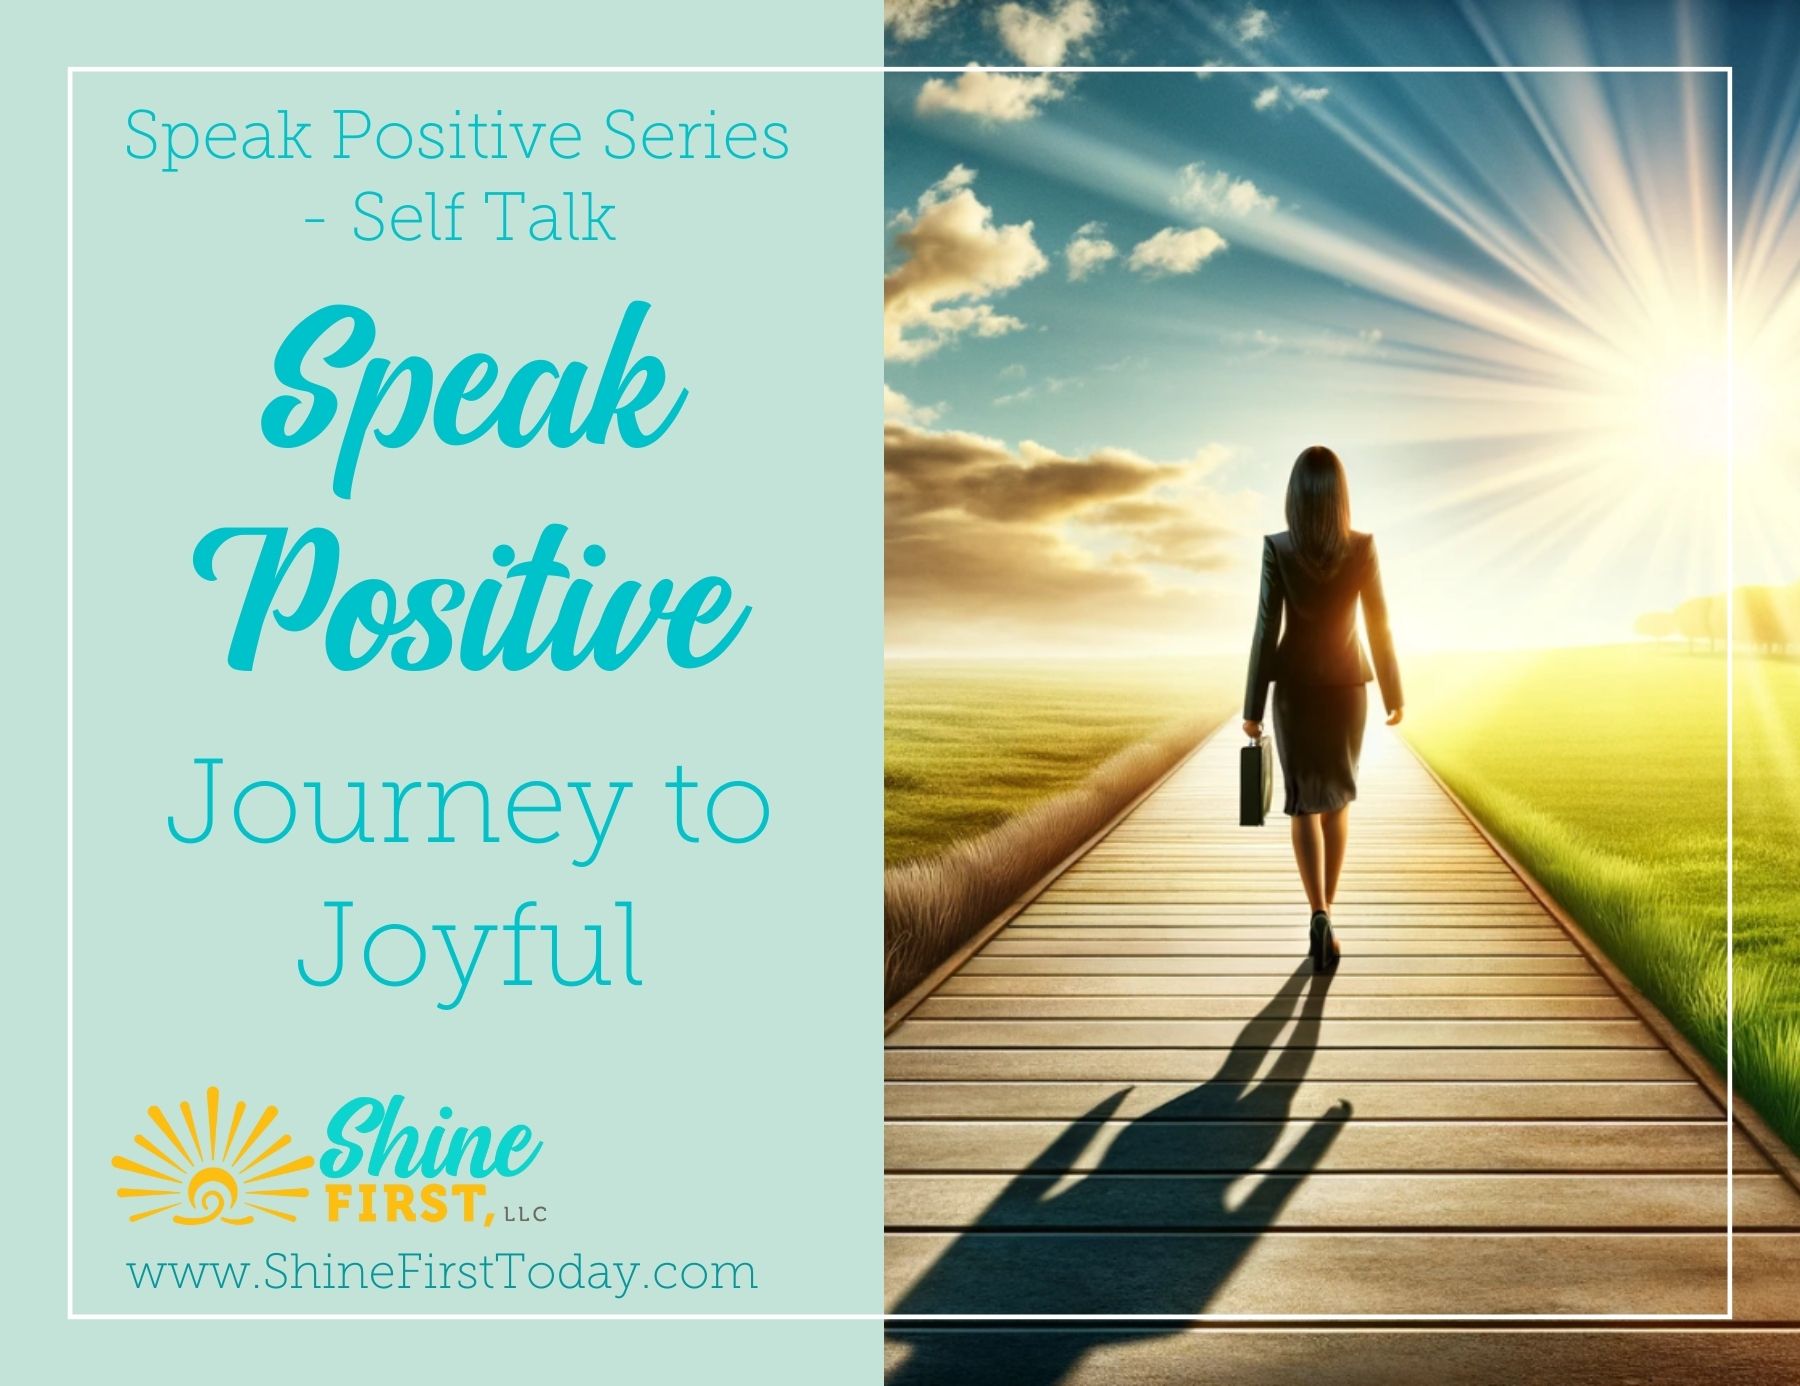 Journey to Joyful: The Art of Speaking Positive in Daily Life